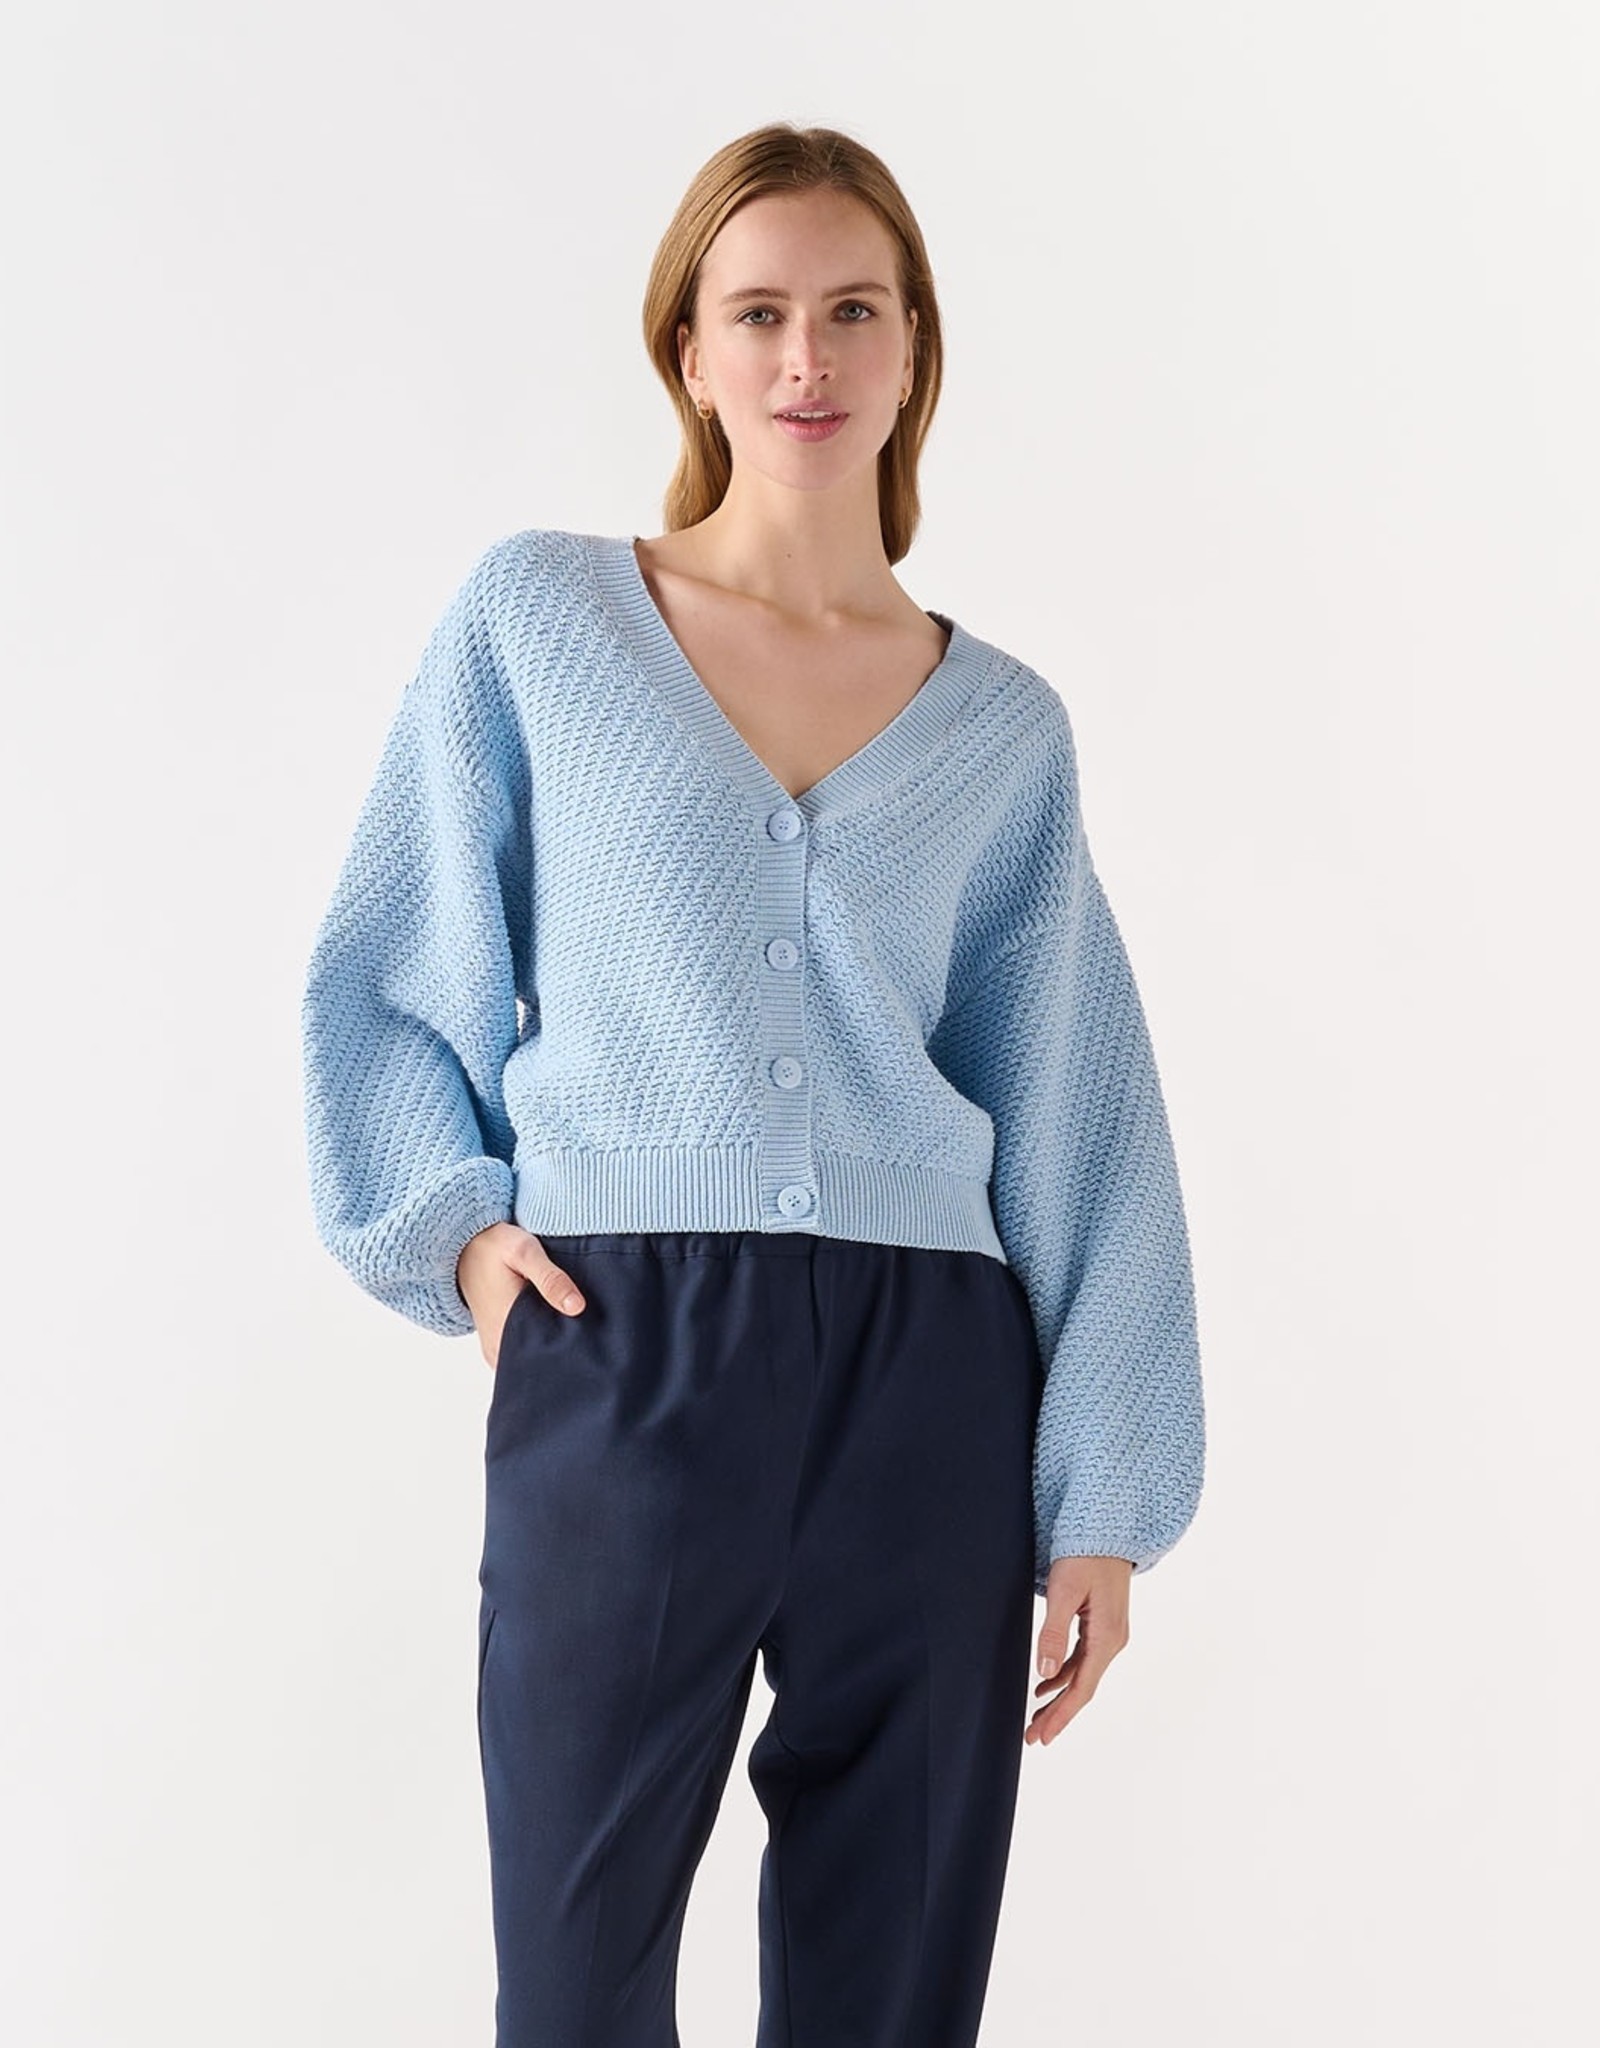 Another Label Cardigan 'Zhour' - Dusty Blue - Another Label